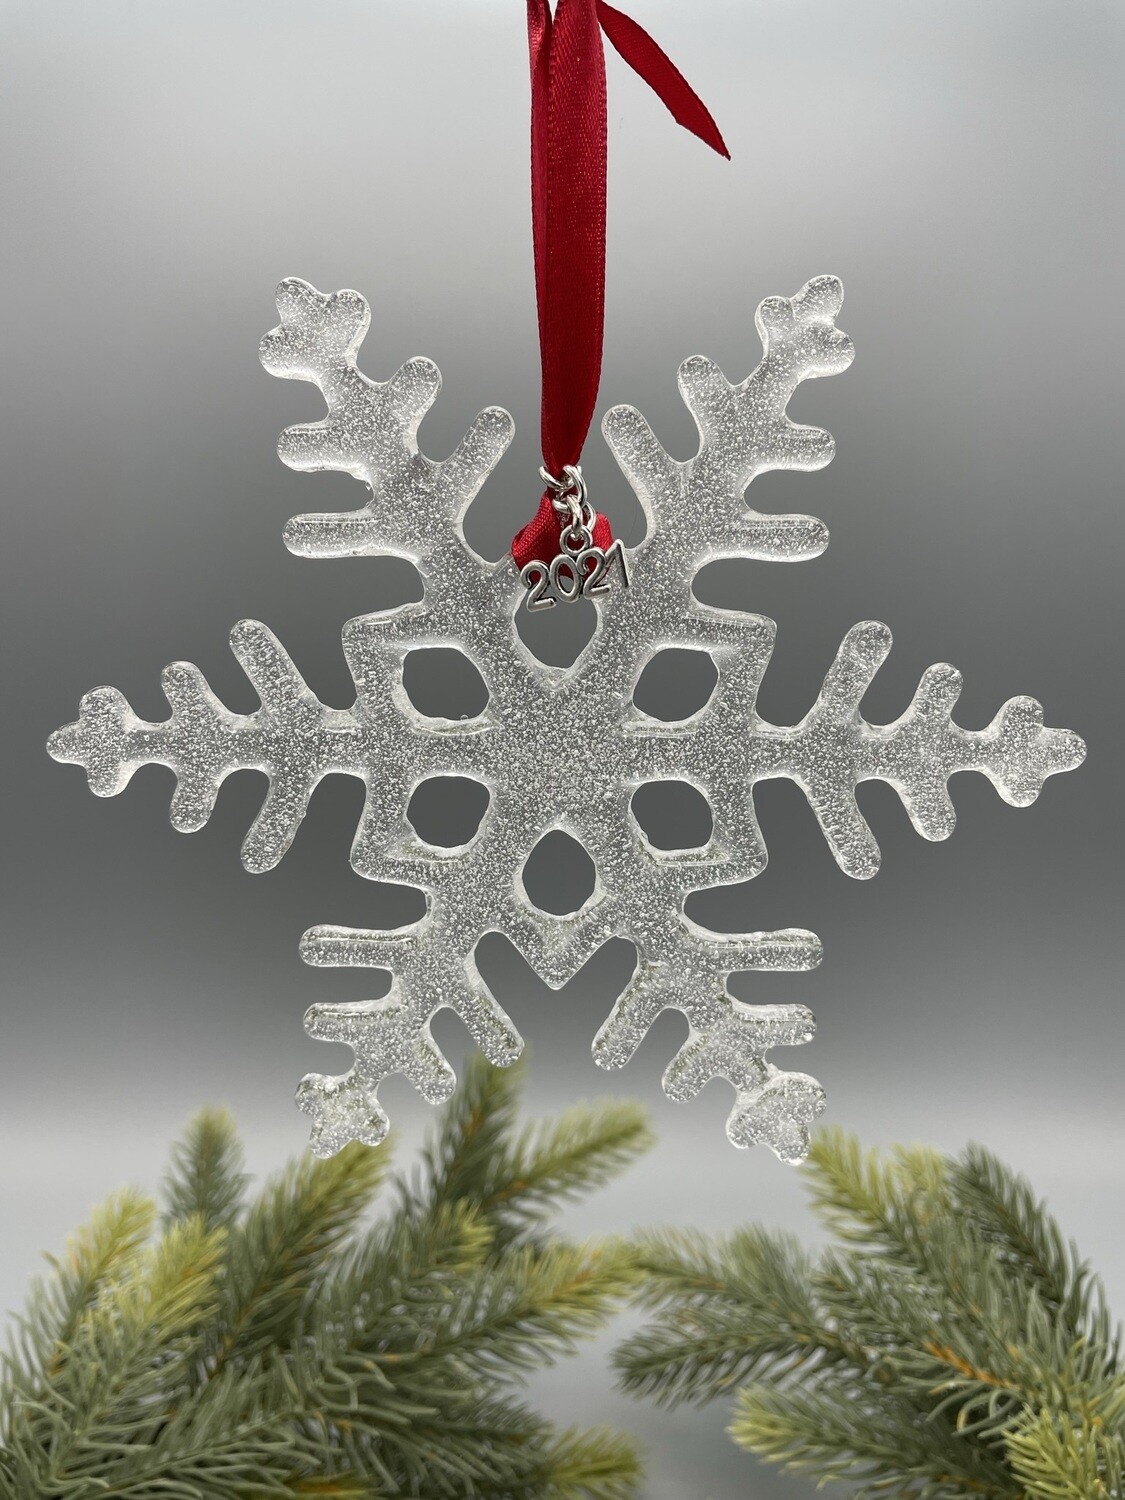 OPTION A: Icy Snowflake Ornaments or Suncatchers